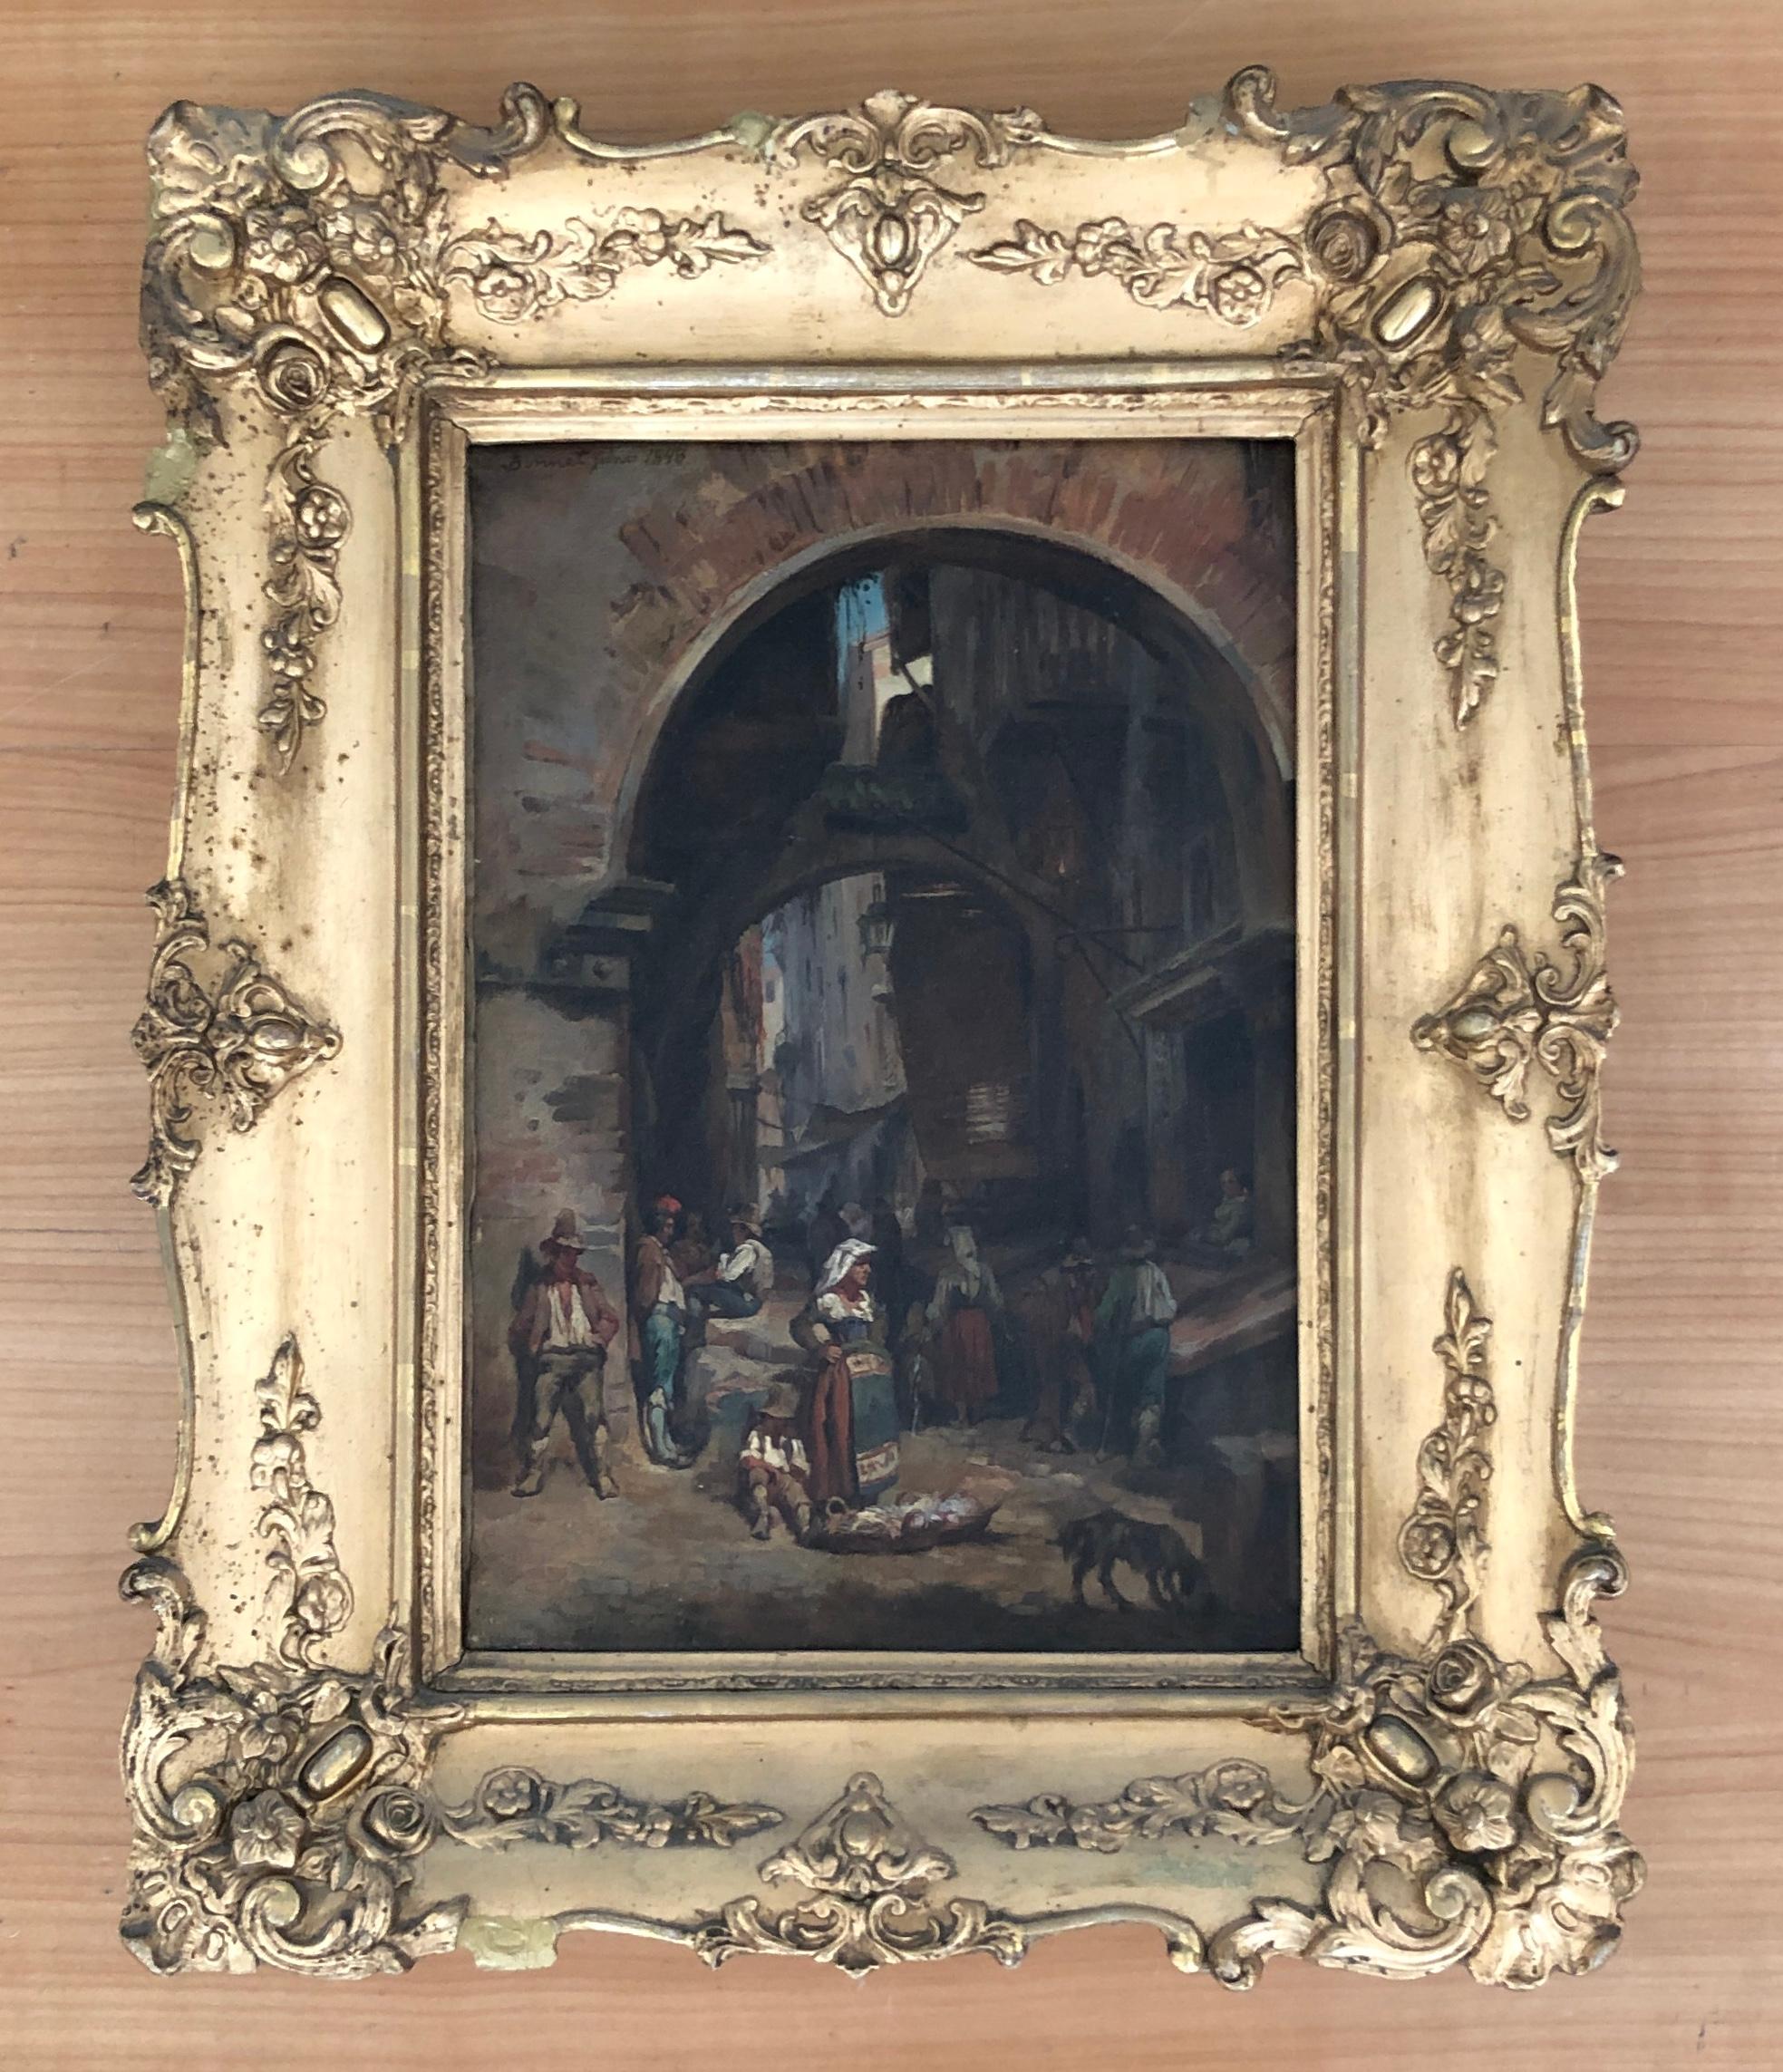 Place in bustling Italy - Painting by François Bonnet